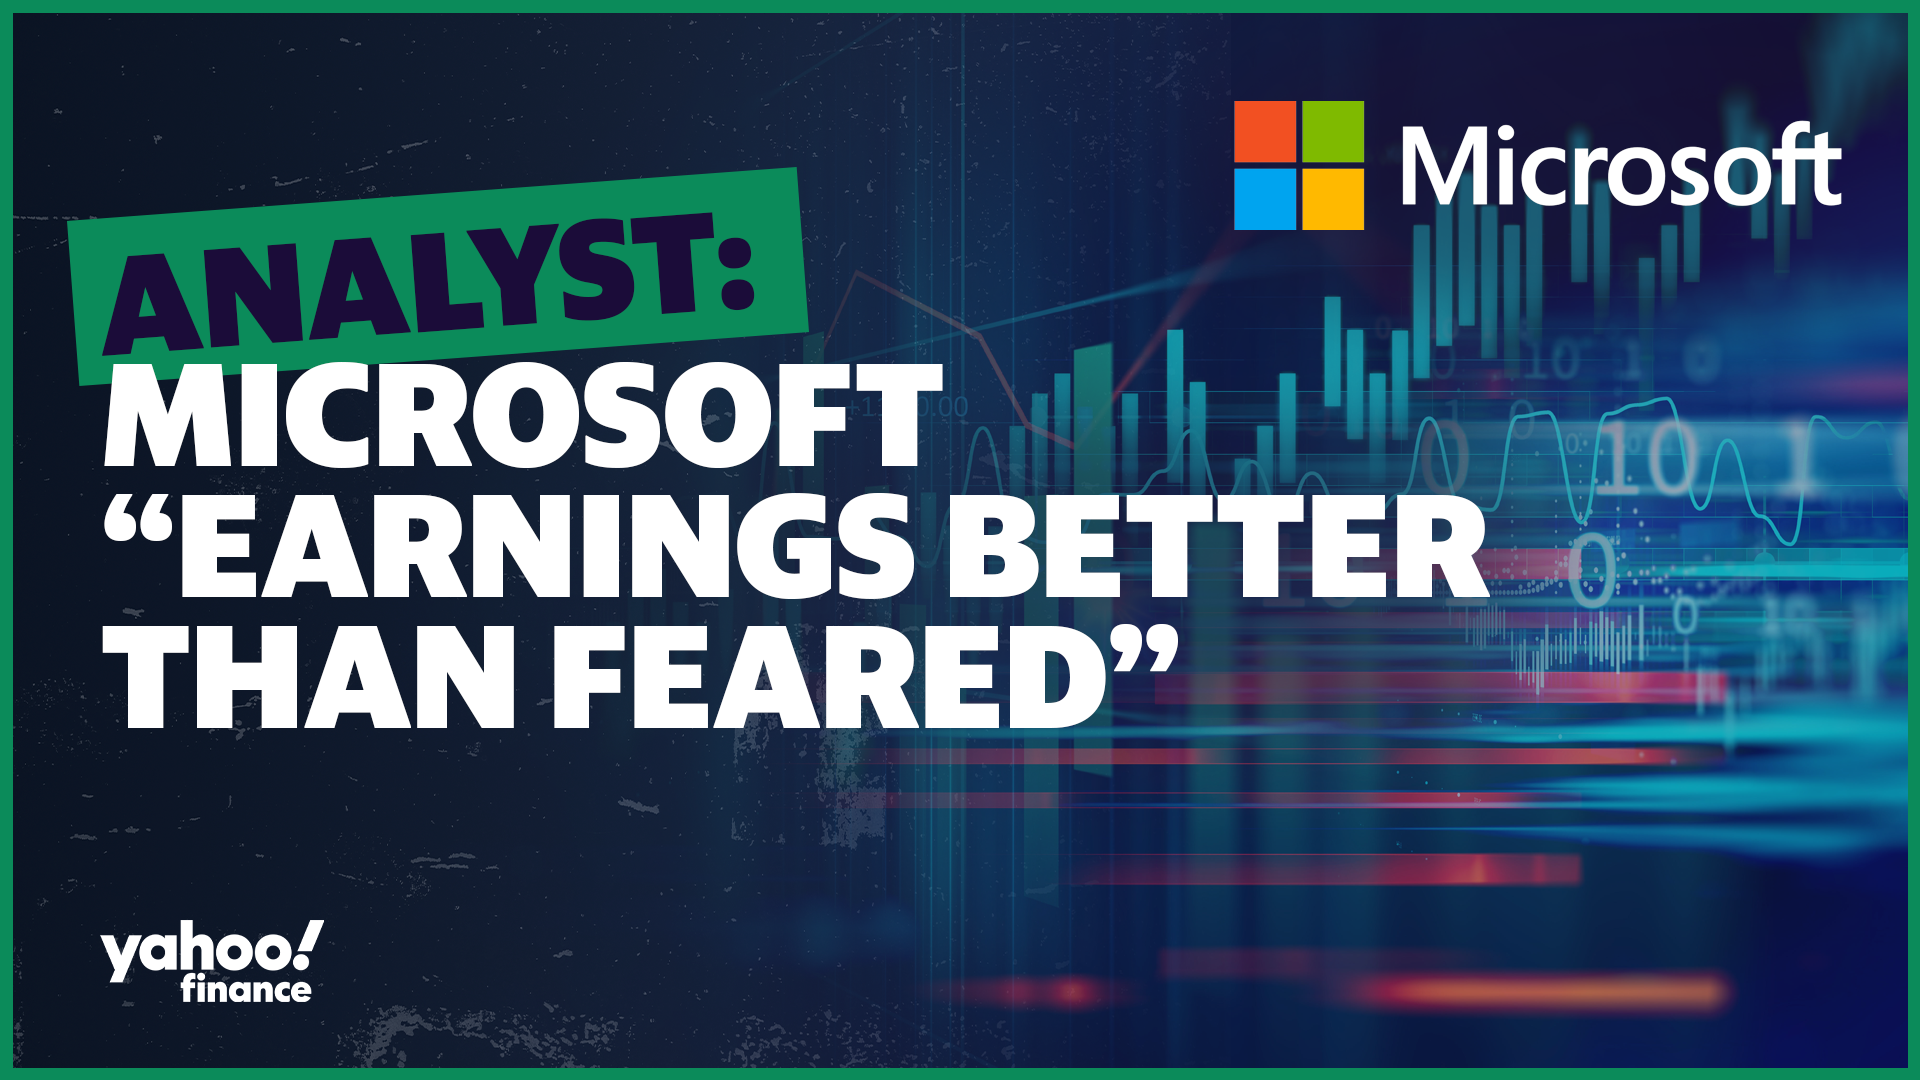 Microsoft stock rallies after on earnings beat and strong guidance